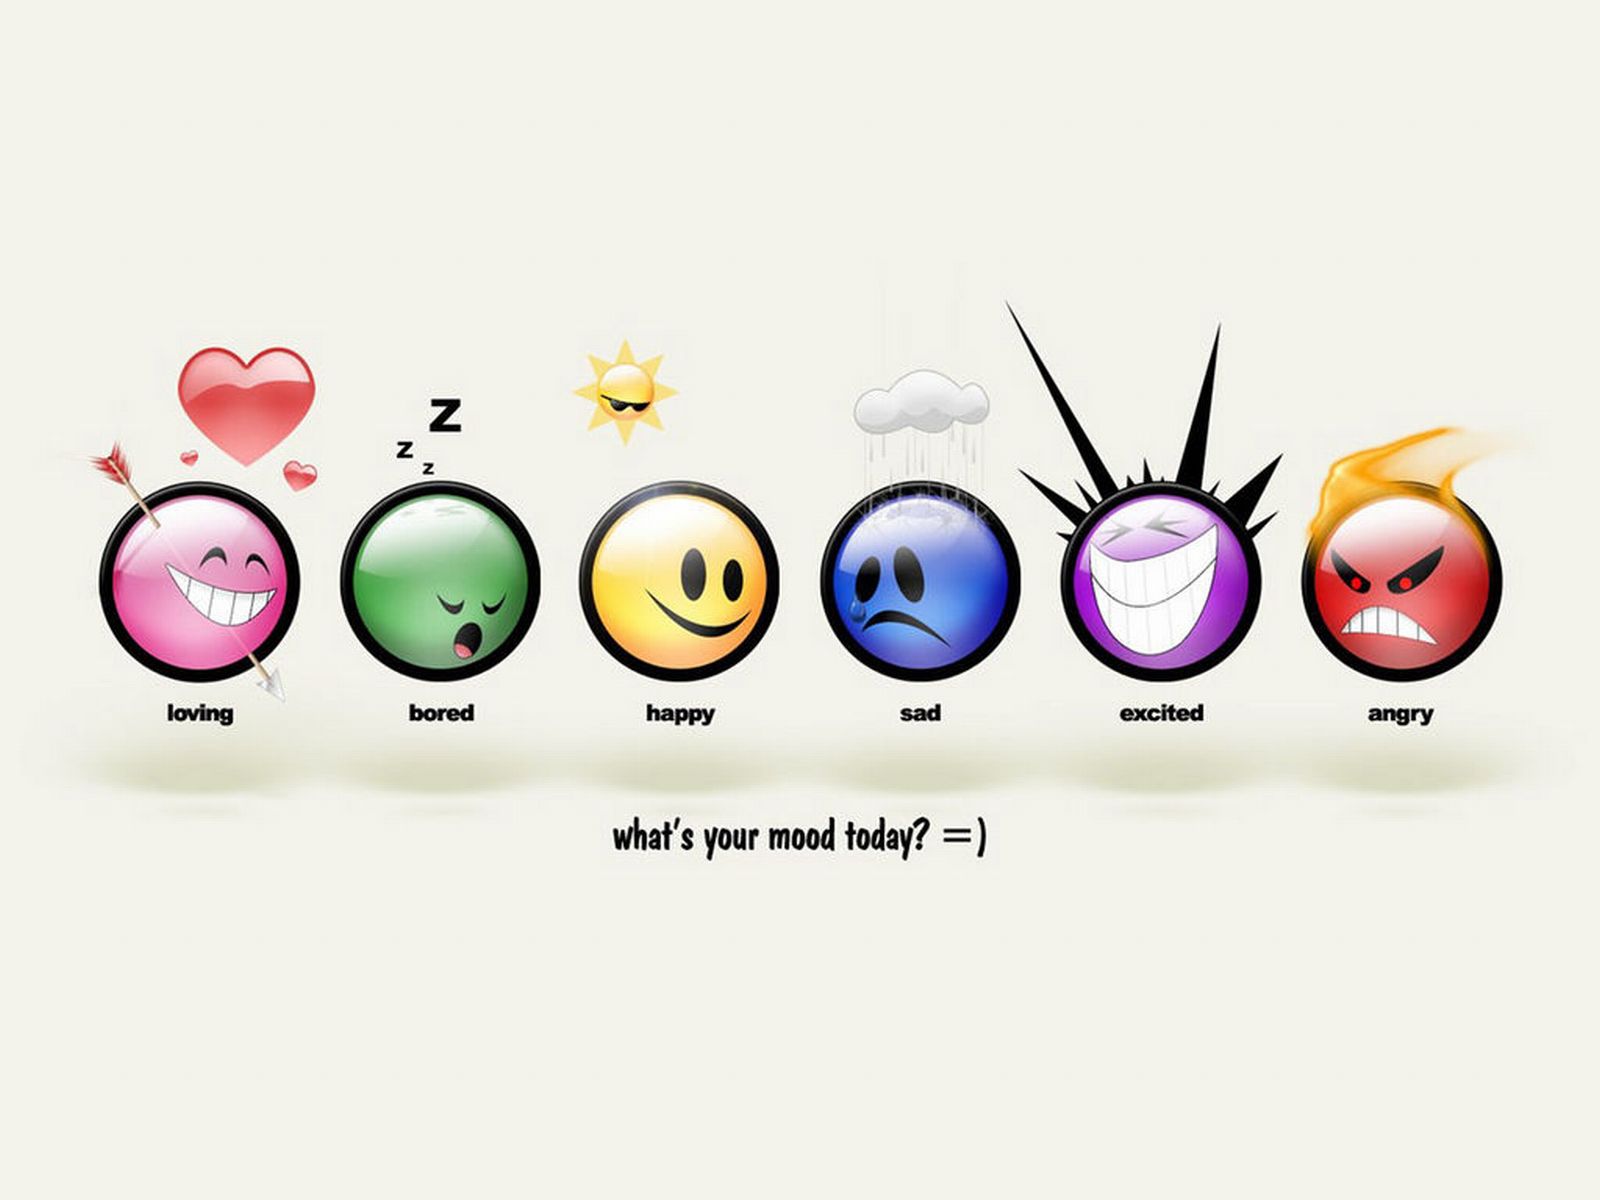 Smiley Faces - Free Smiley Face Wallpaper for your Desktop Background